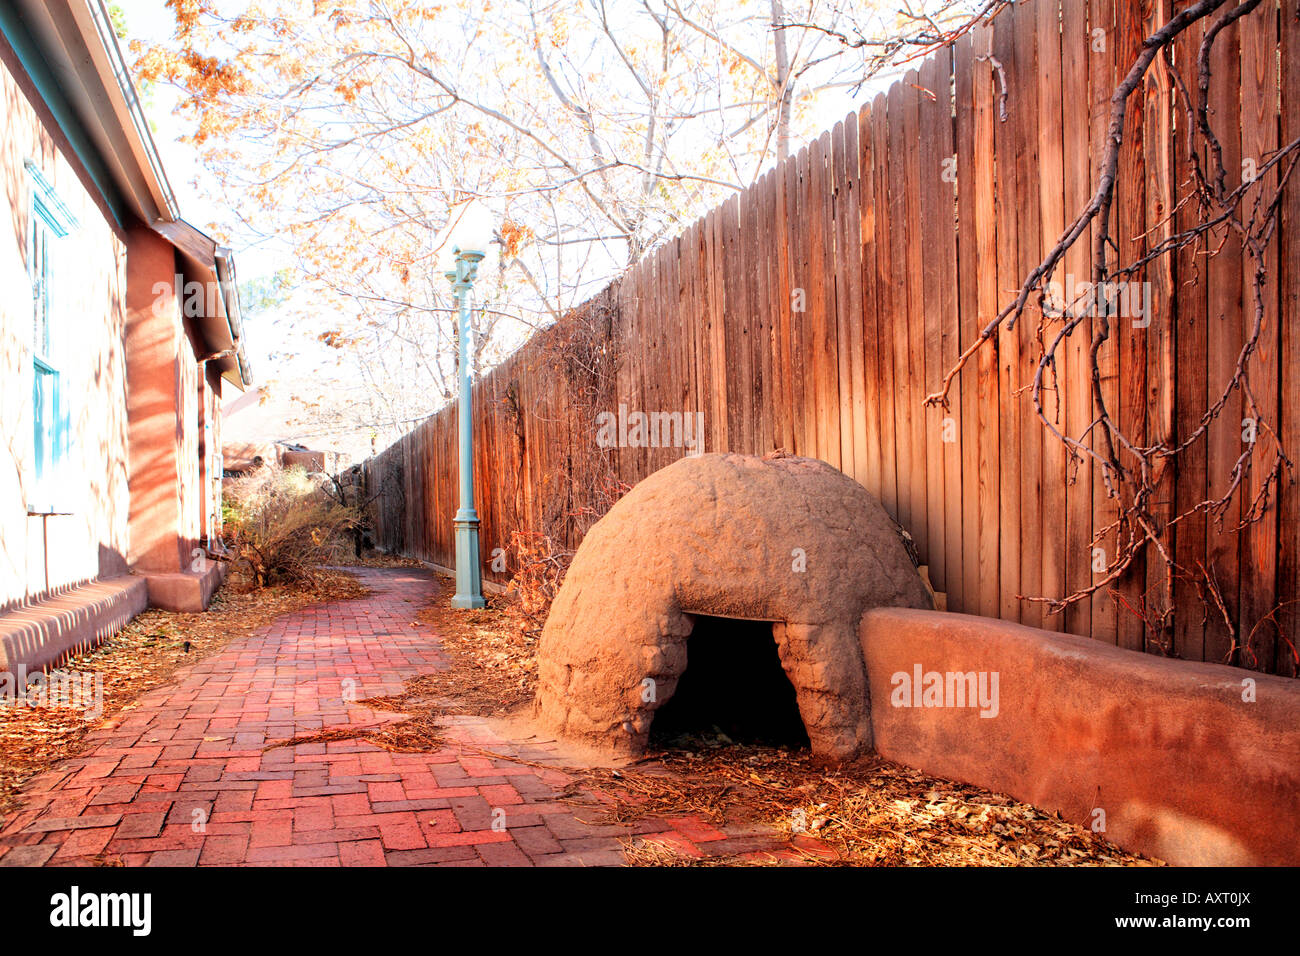 SIDE STREET AND A TRADITIONAL OUTDOOR OVEN IN OLD TOWN IN ALBUQUERQUE NEW MEXICO USA IN LATE FALL Stock Photo